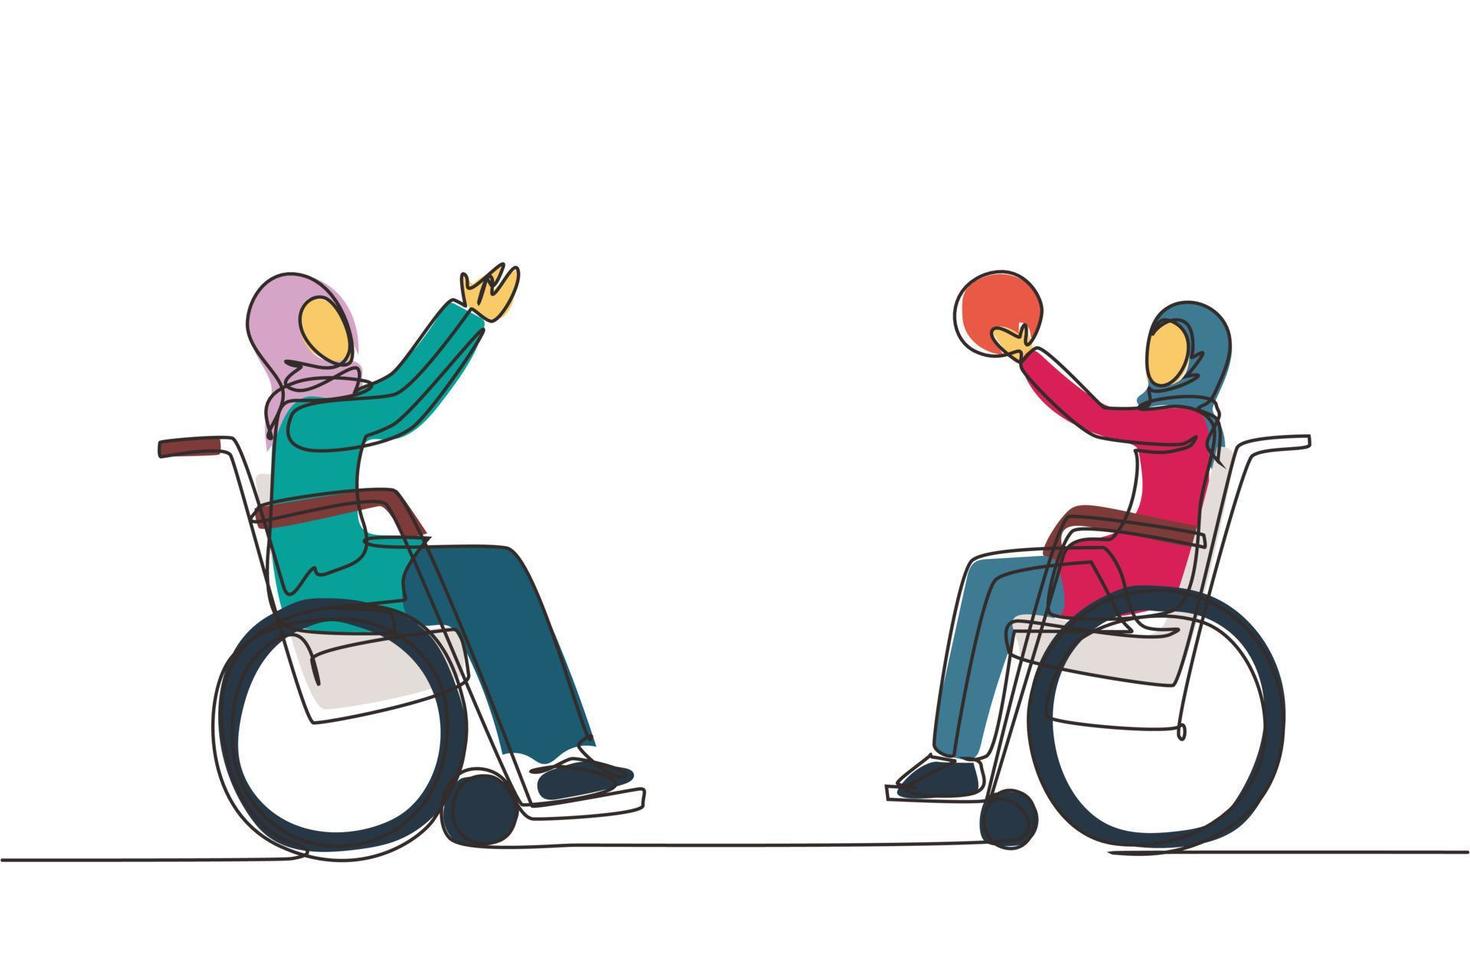 Continuous one line drawing joyful disabled young Arabian woman in wheelchair playing basketball. Concept of adaptive sports for disabled people. Single line draw design vector graphic illustration